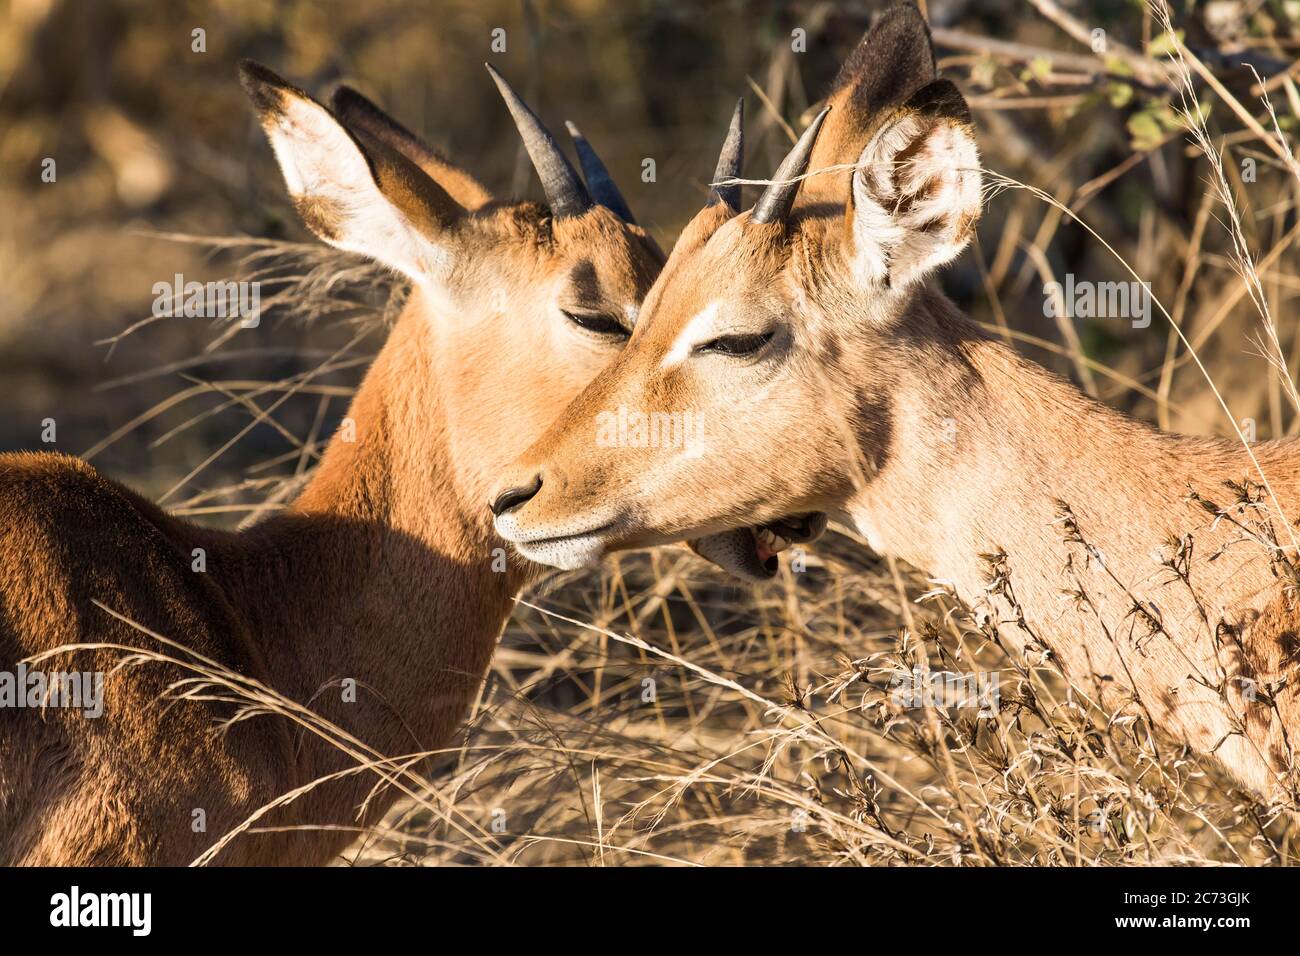 Impalas approaching their faces each other, Kruger National Park, Mpumalanga Province, South Africa, Africa Stock Photo